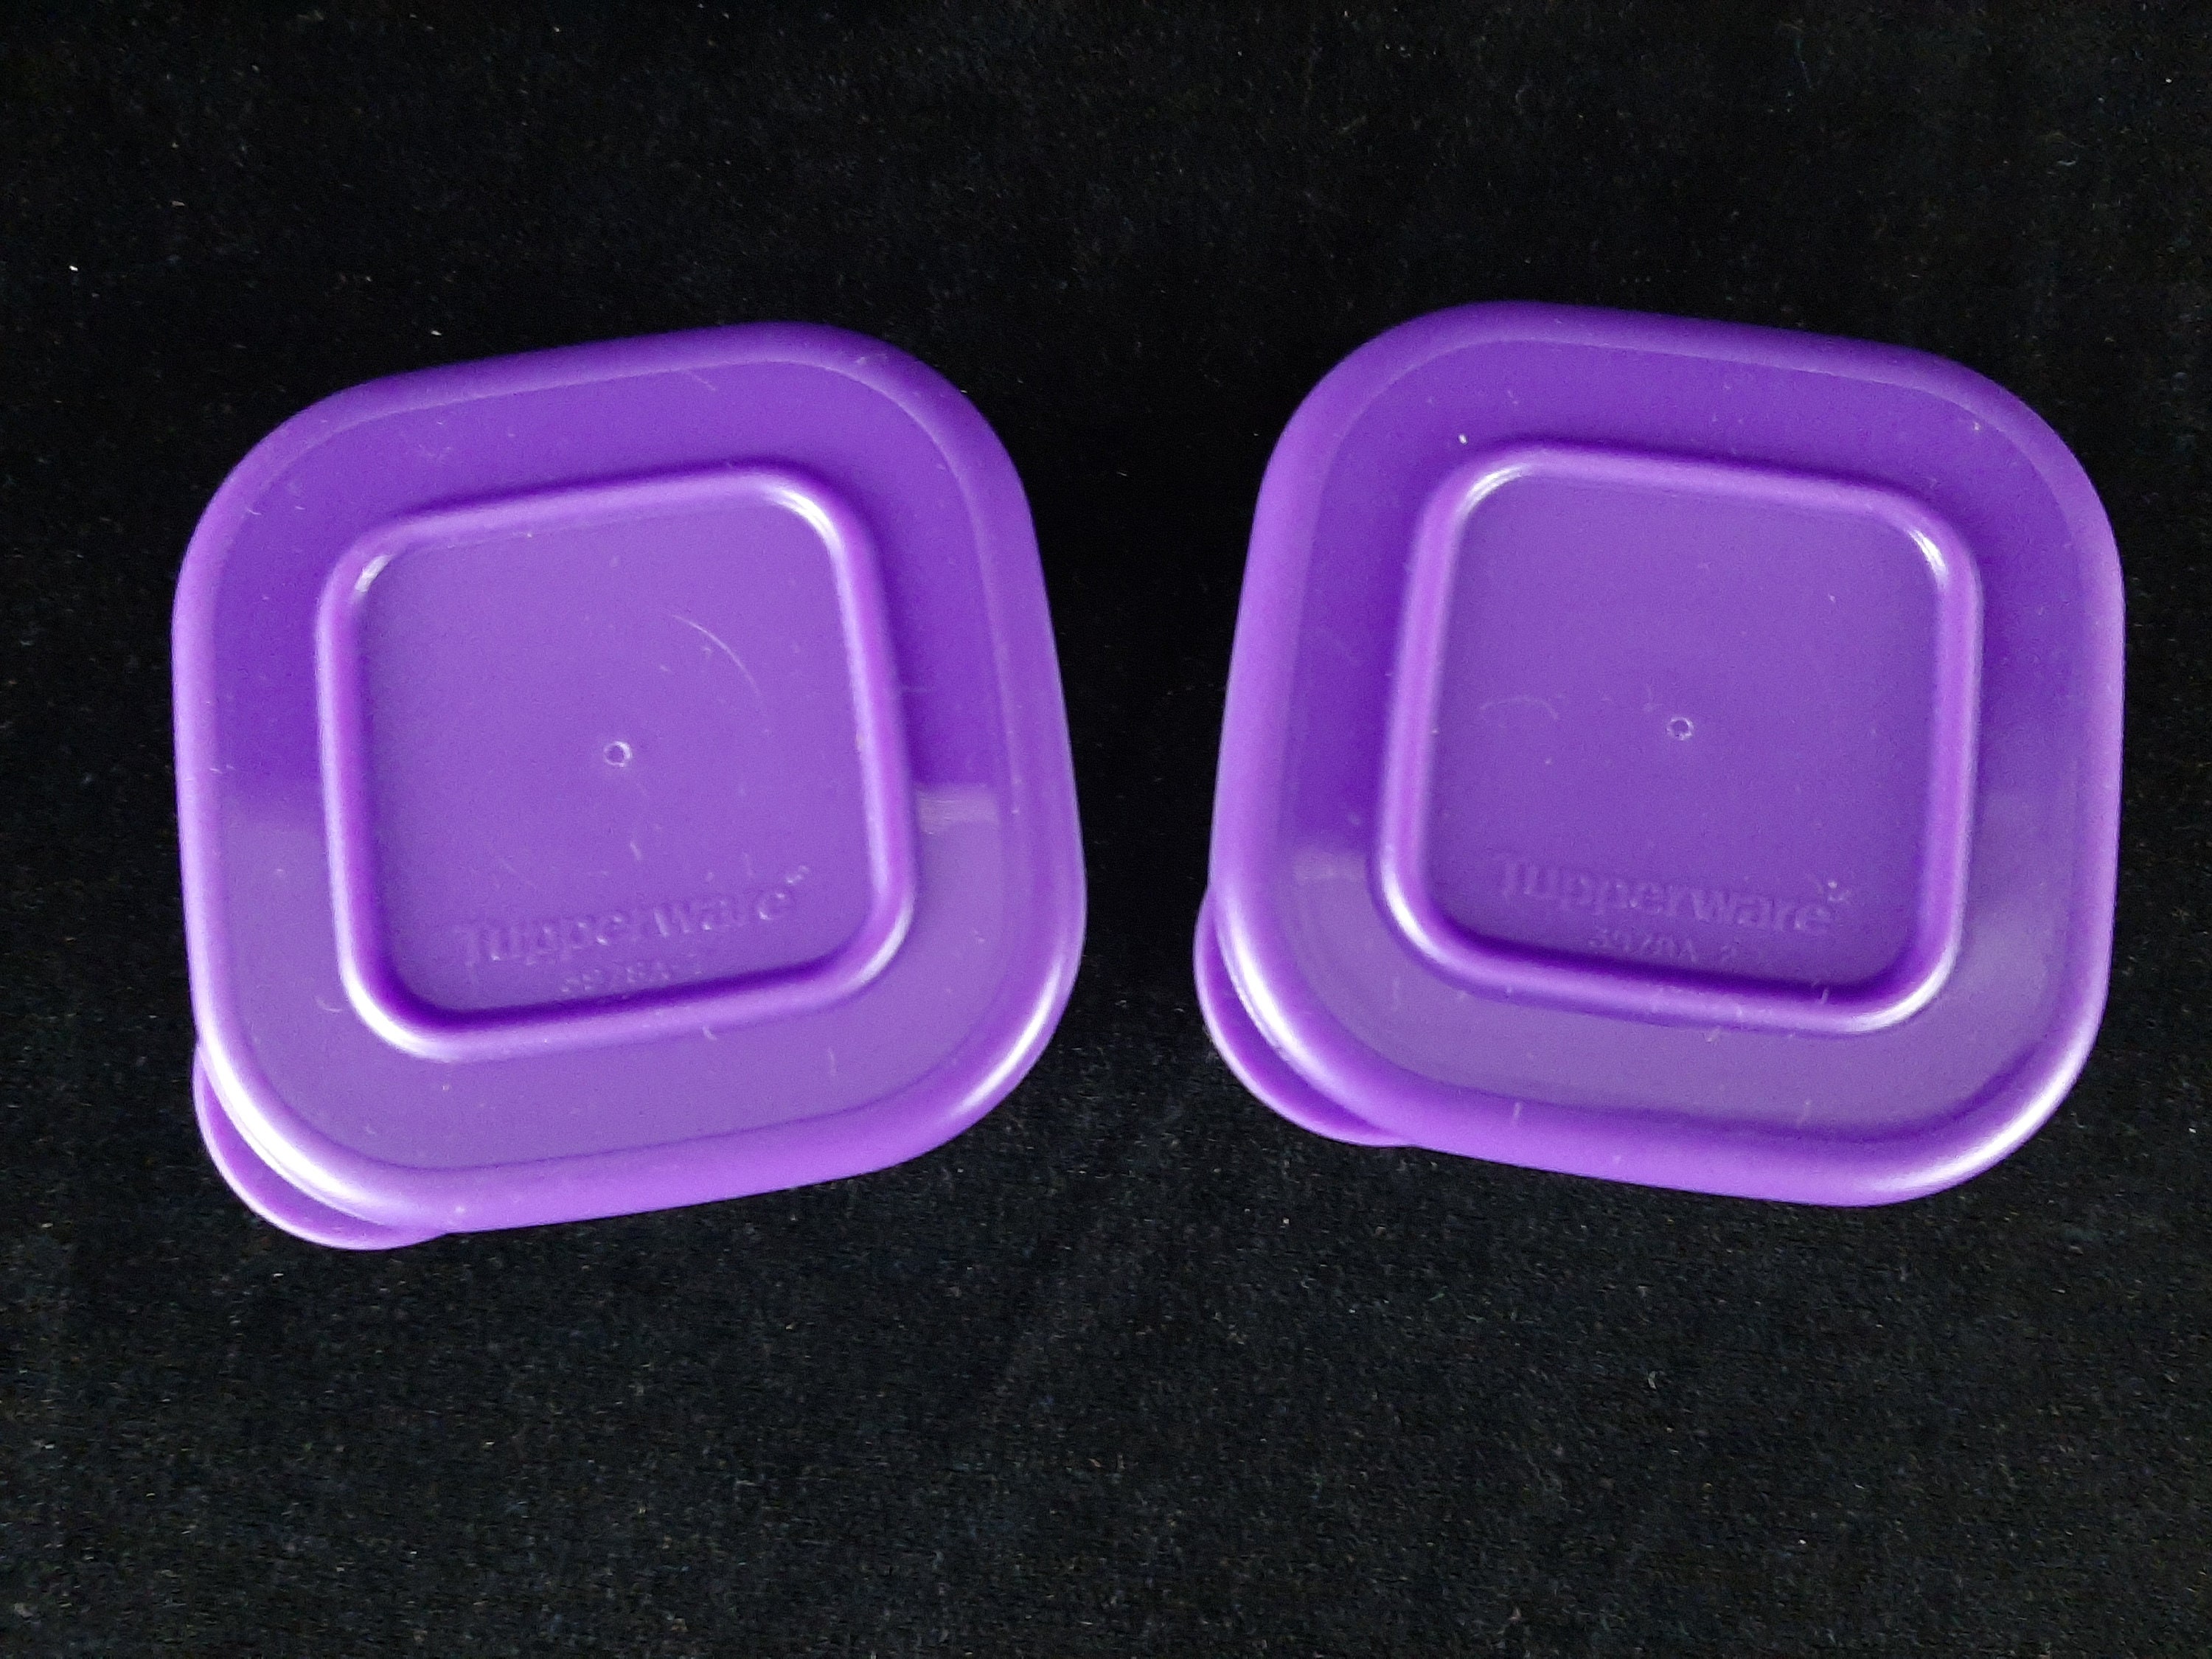 Tupperware 4040A-5 Cool Square Mini Cubes Containers 200 Ml/ 1 Cup Purple 